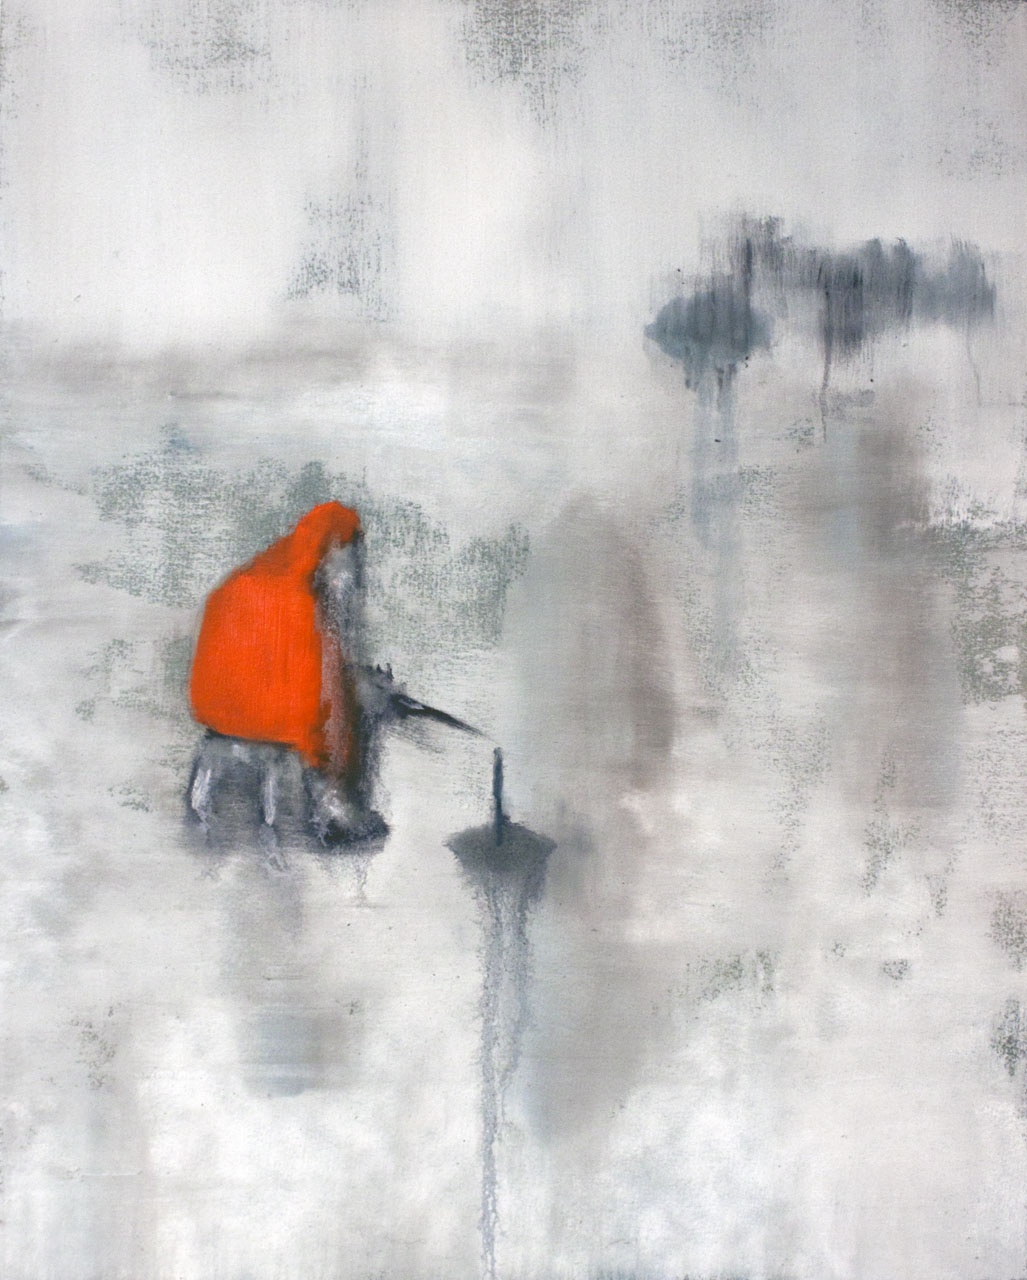 Jim Hittinger,  "Ice Fisher," oil on paper, 2015, 18x24 inches.
